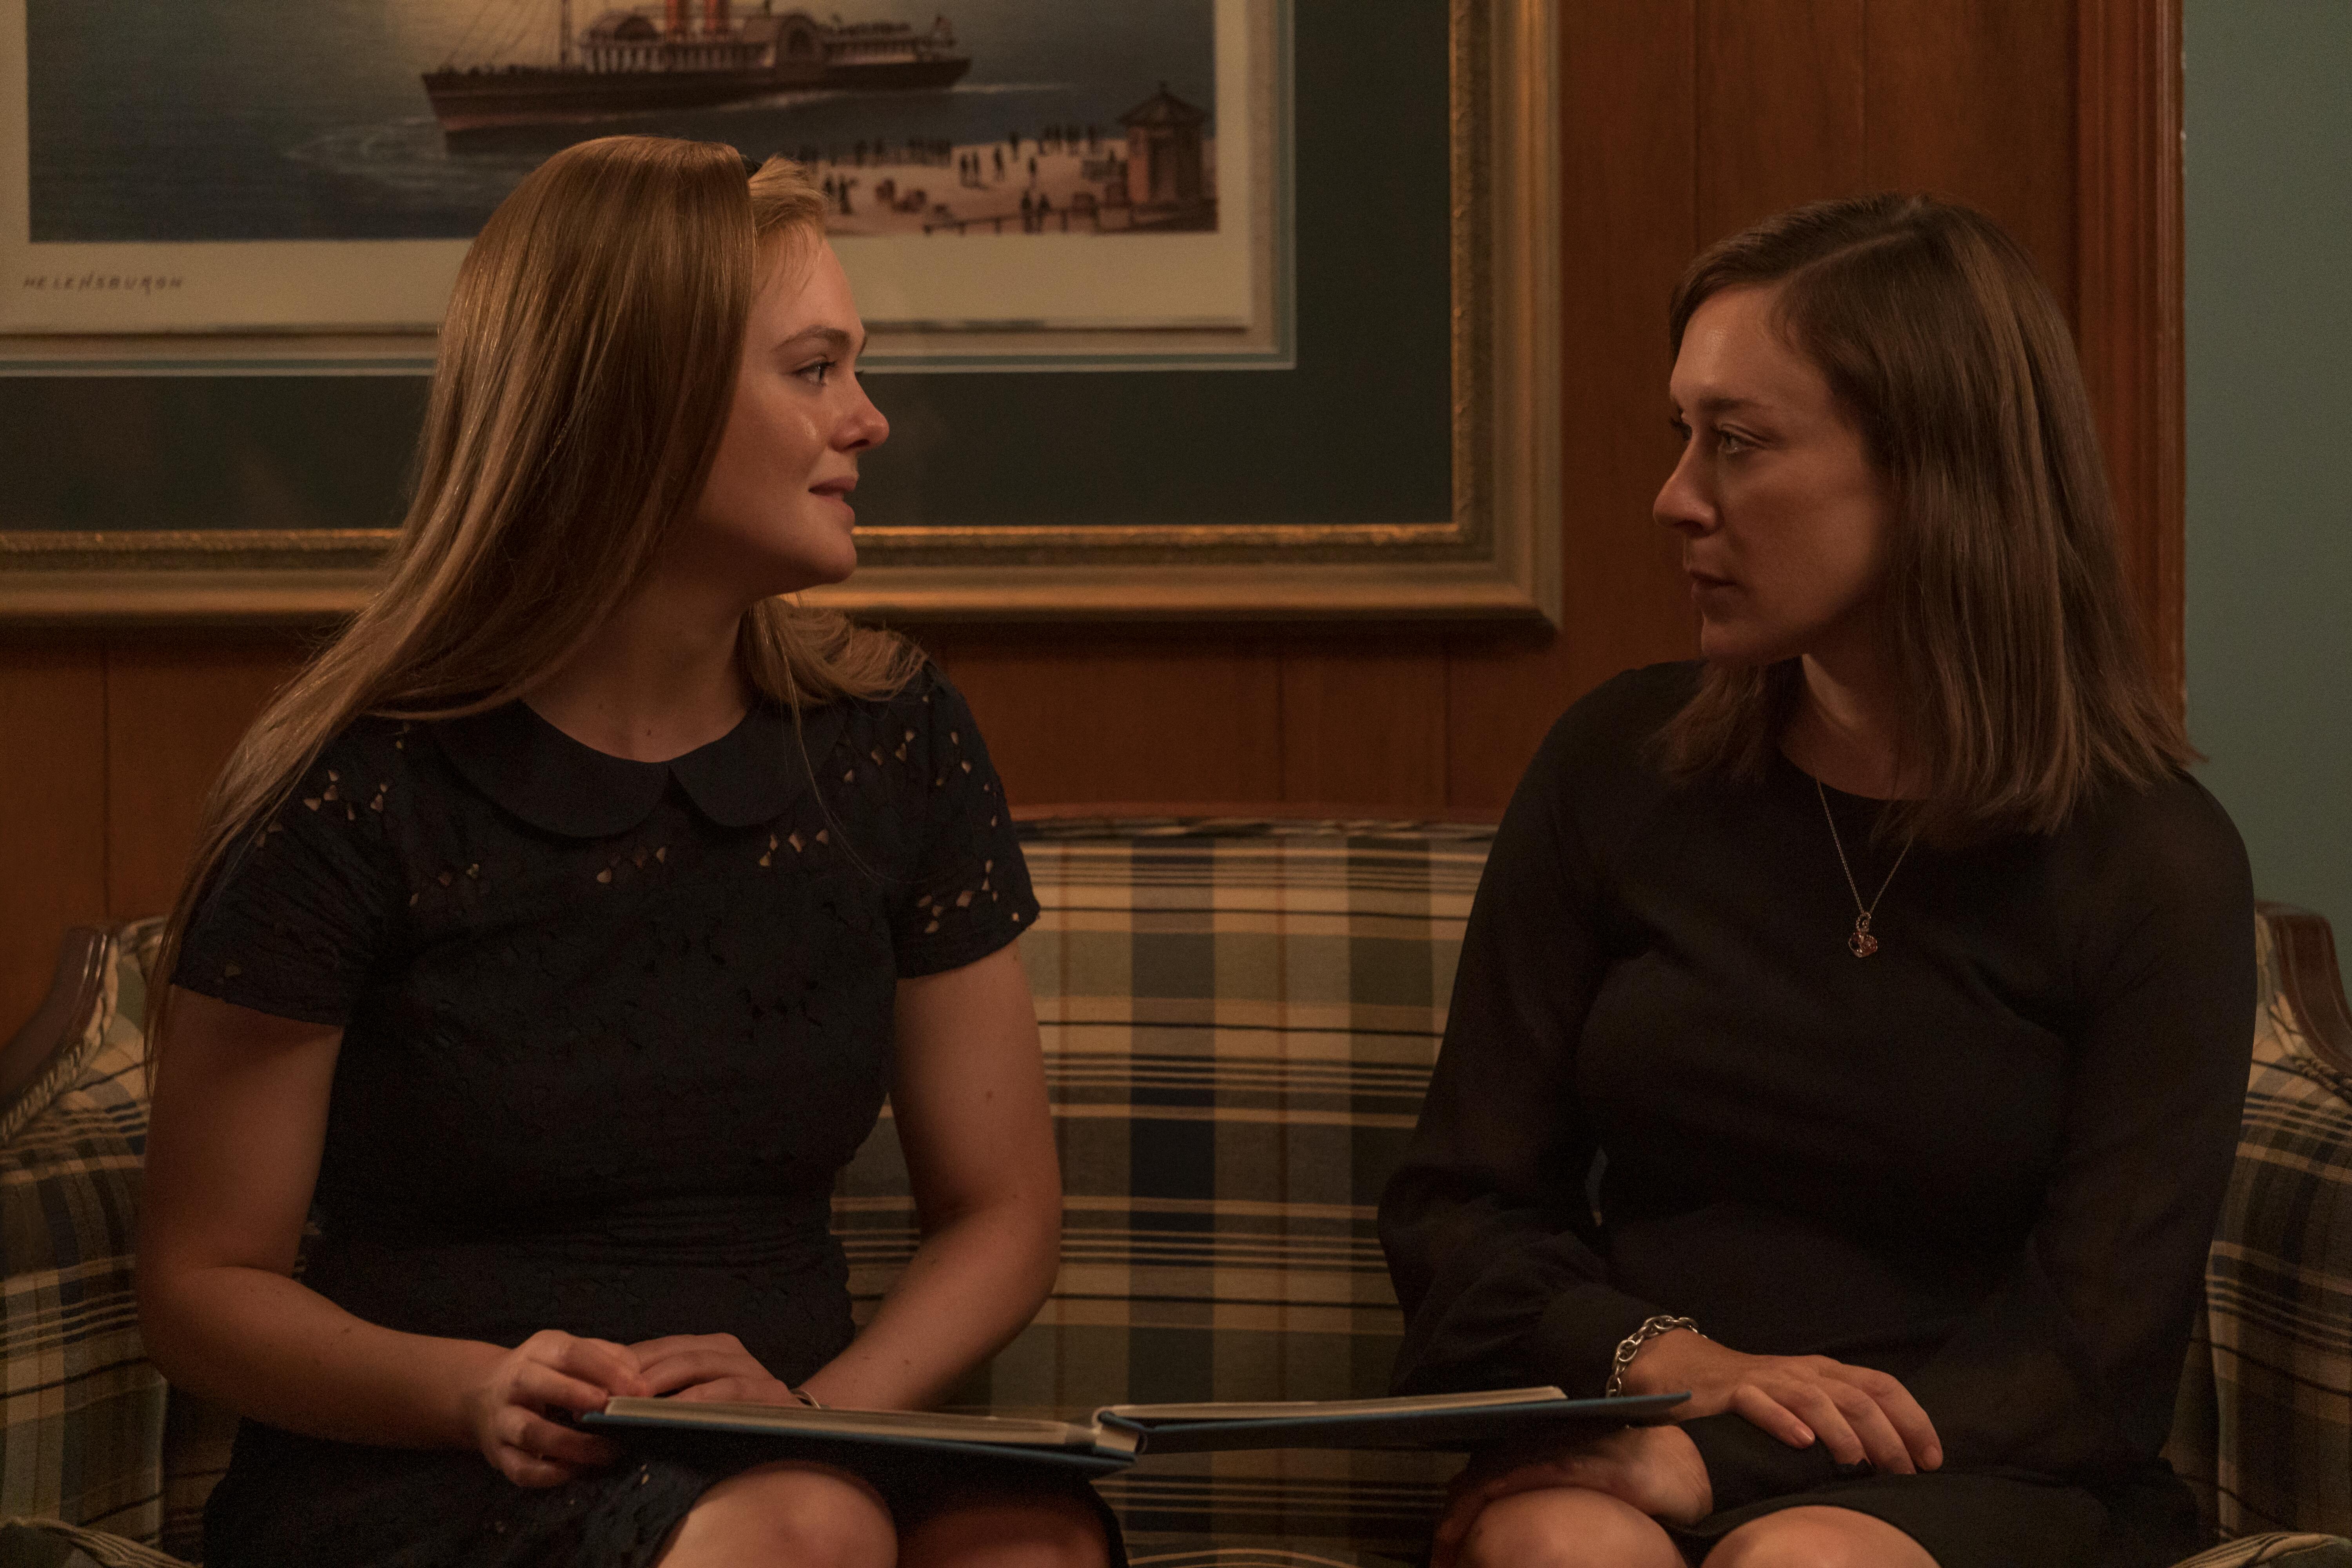 Elle Fanning as Michelle talks to Chloe Sevigny as Lynn in Hulu's 'The Girl From Plainville'